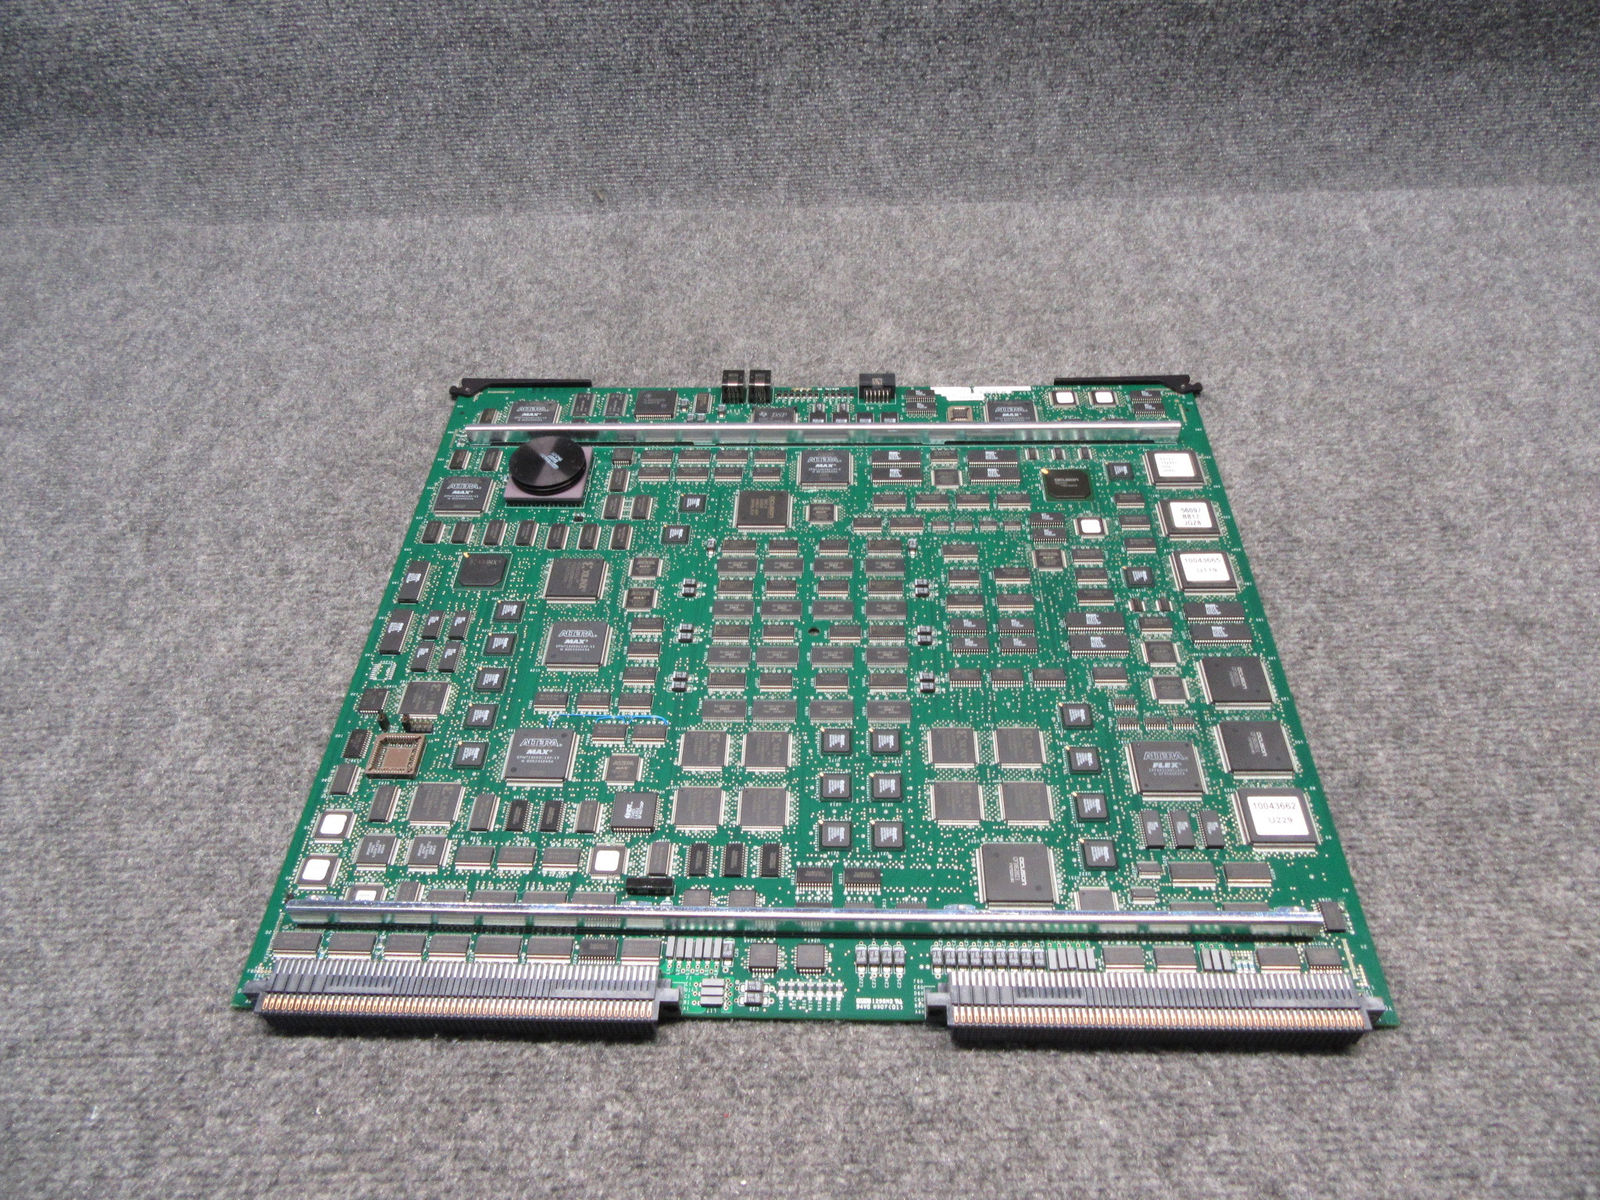 08241472 Circuit Board For Siemens Acuson Sequoia C256 Ultrasound DIAGNOSTIC ULTRASOUND MACHINES FOR SALE